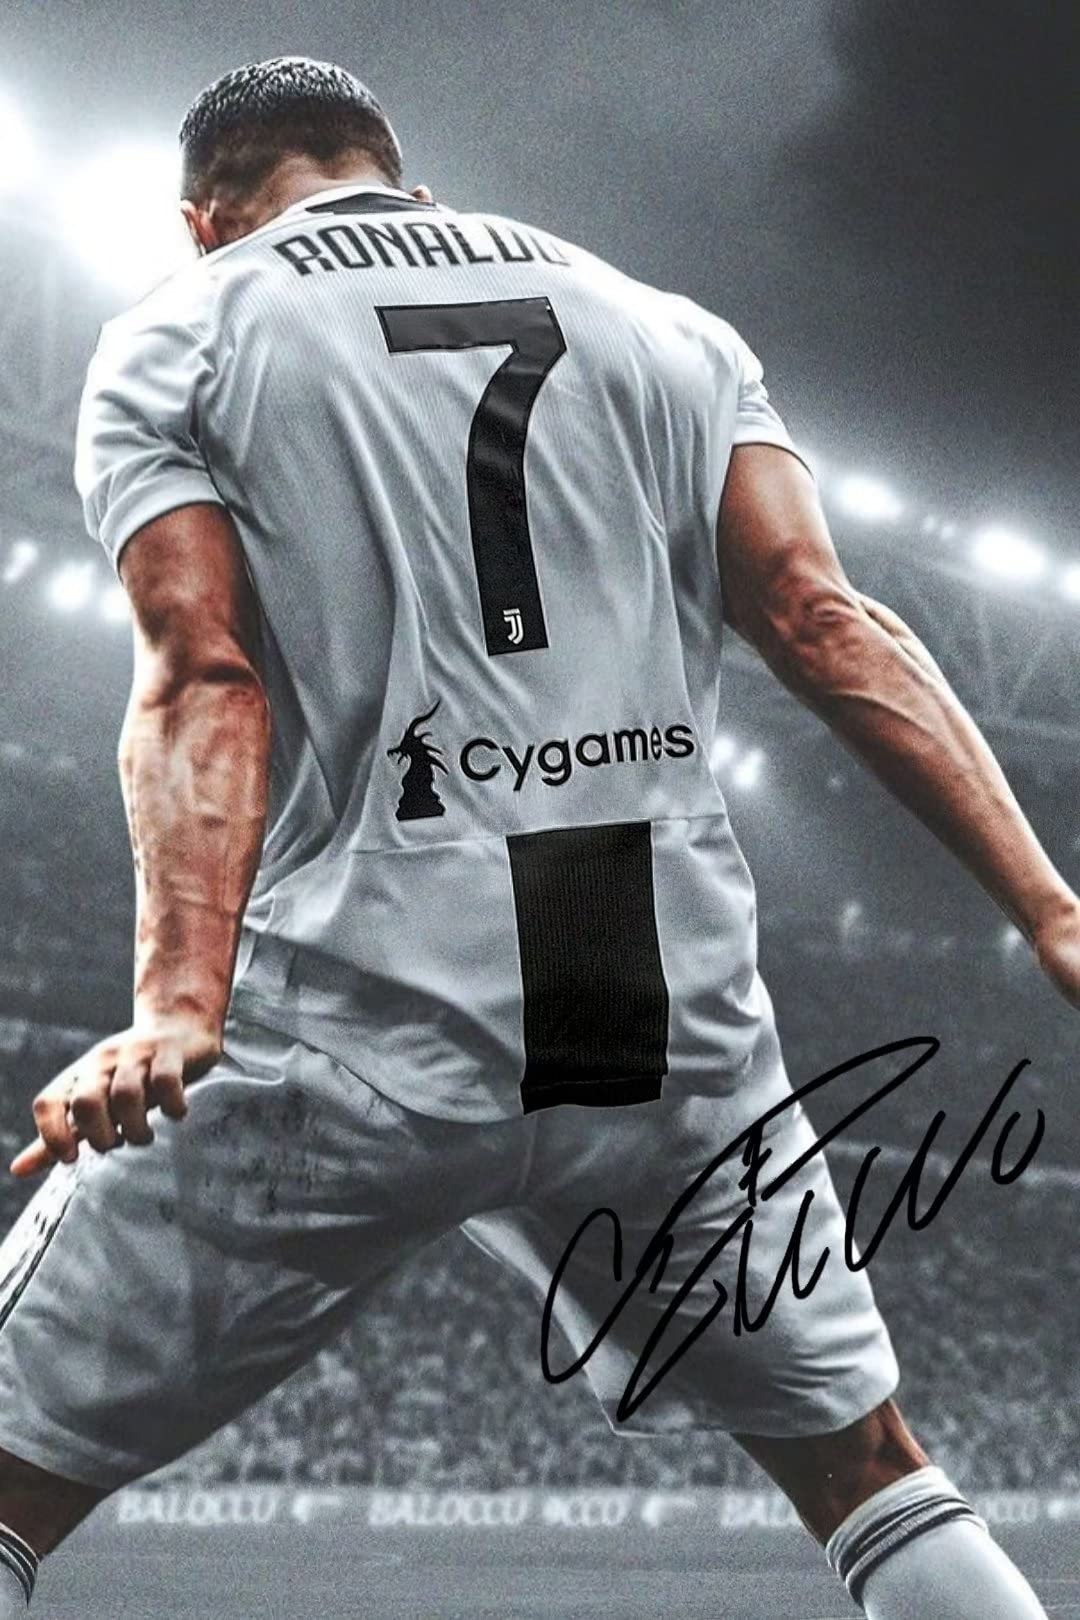 YHSGY ronaldo poster Canvas Unframed 12x18 inches Soccer Star for Boys Bedroom Walls Wall Poster Motivational posters for room aesthetic : Sports & Outdoors